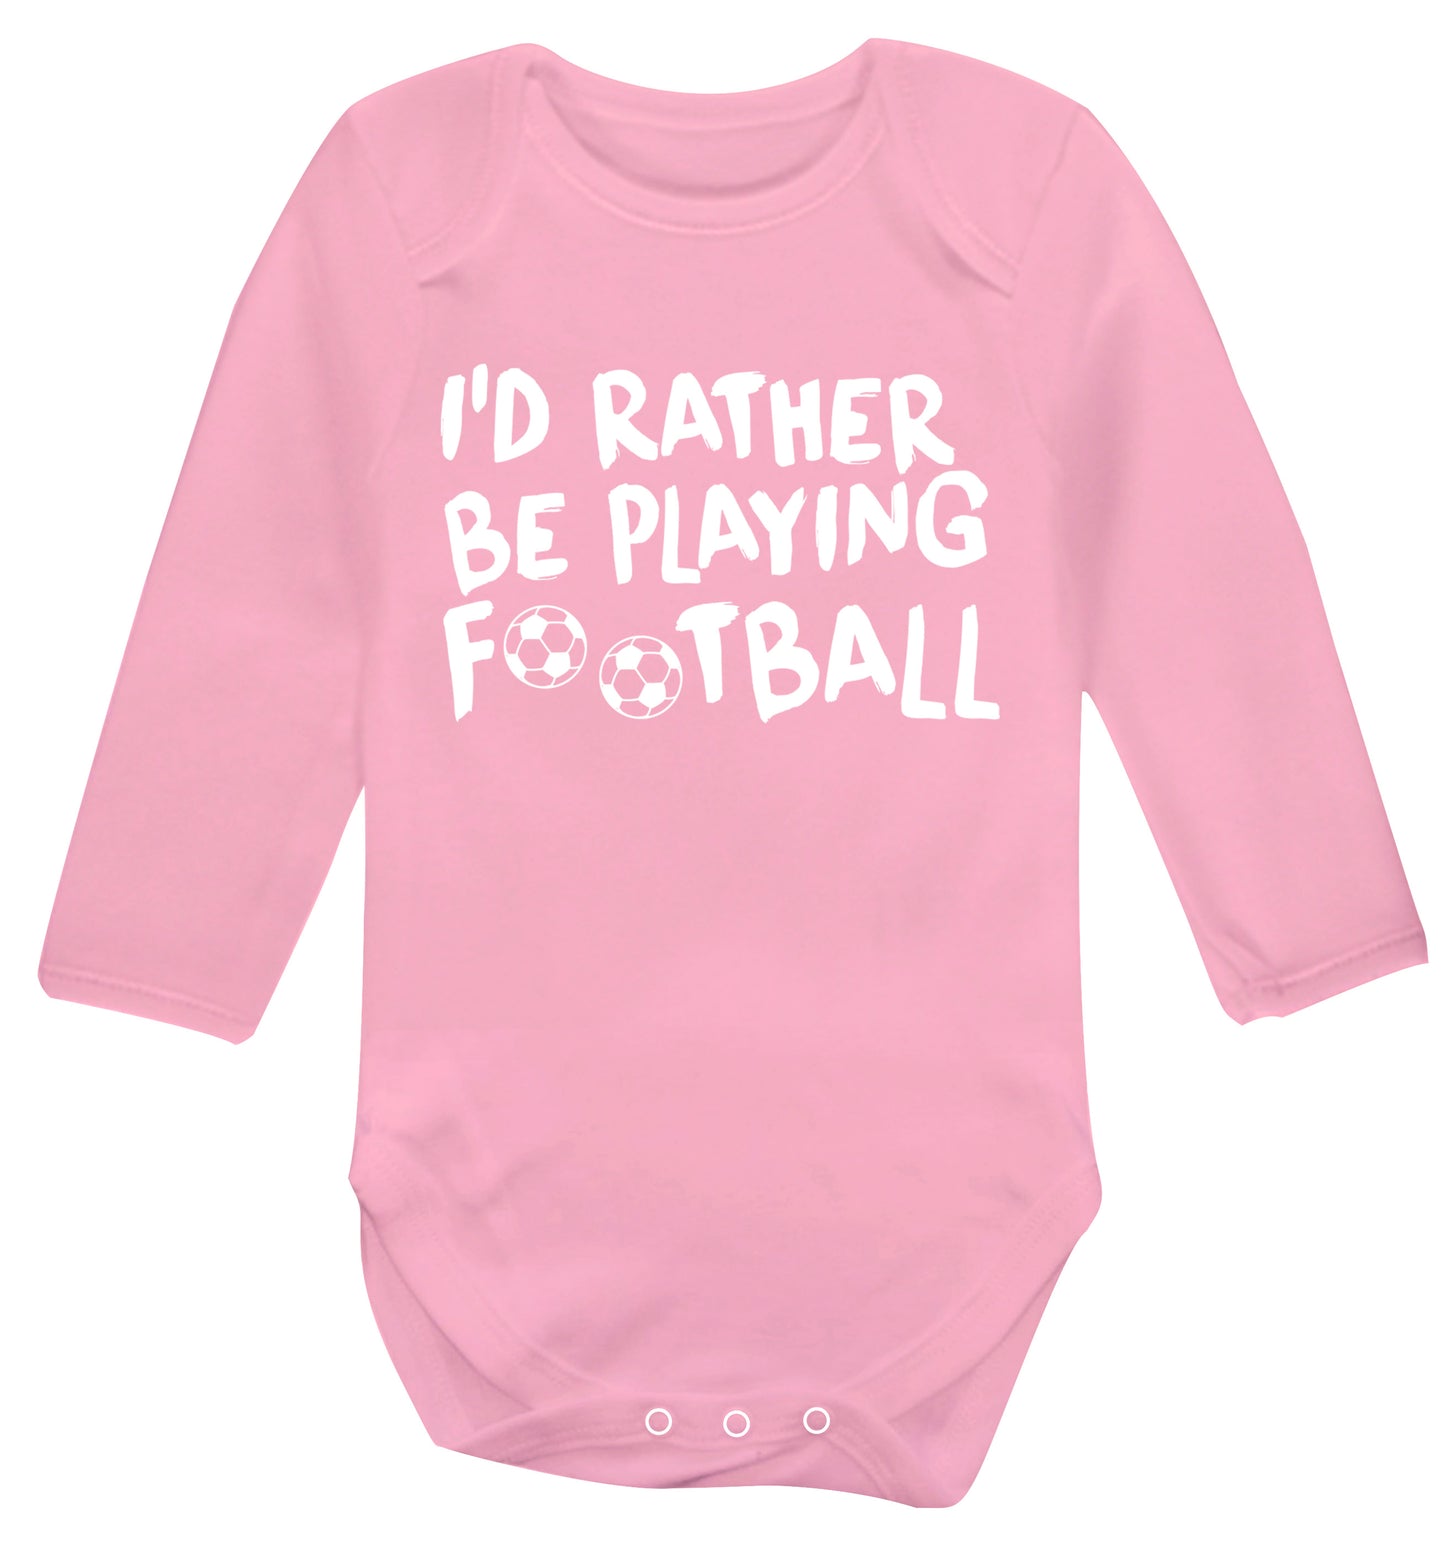 I'd rather be playing football Baby Vest long sleeved pale pink 6-12 months